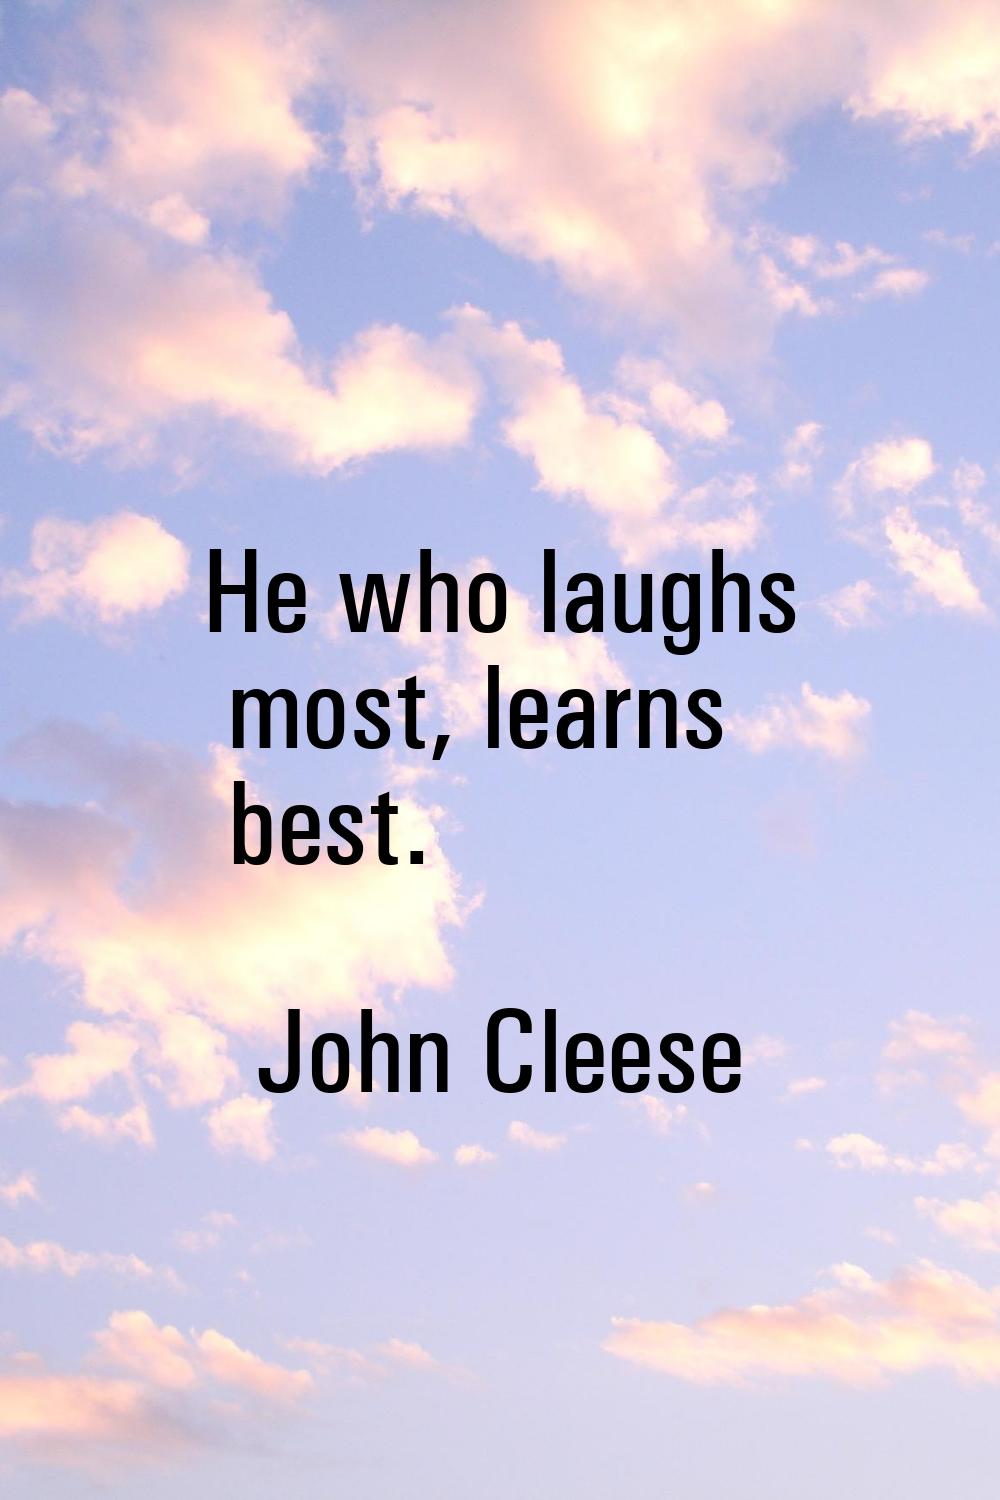 He who laughs most, learns best.